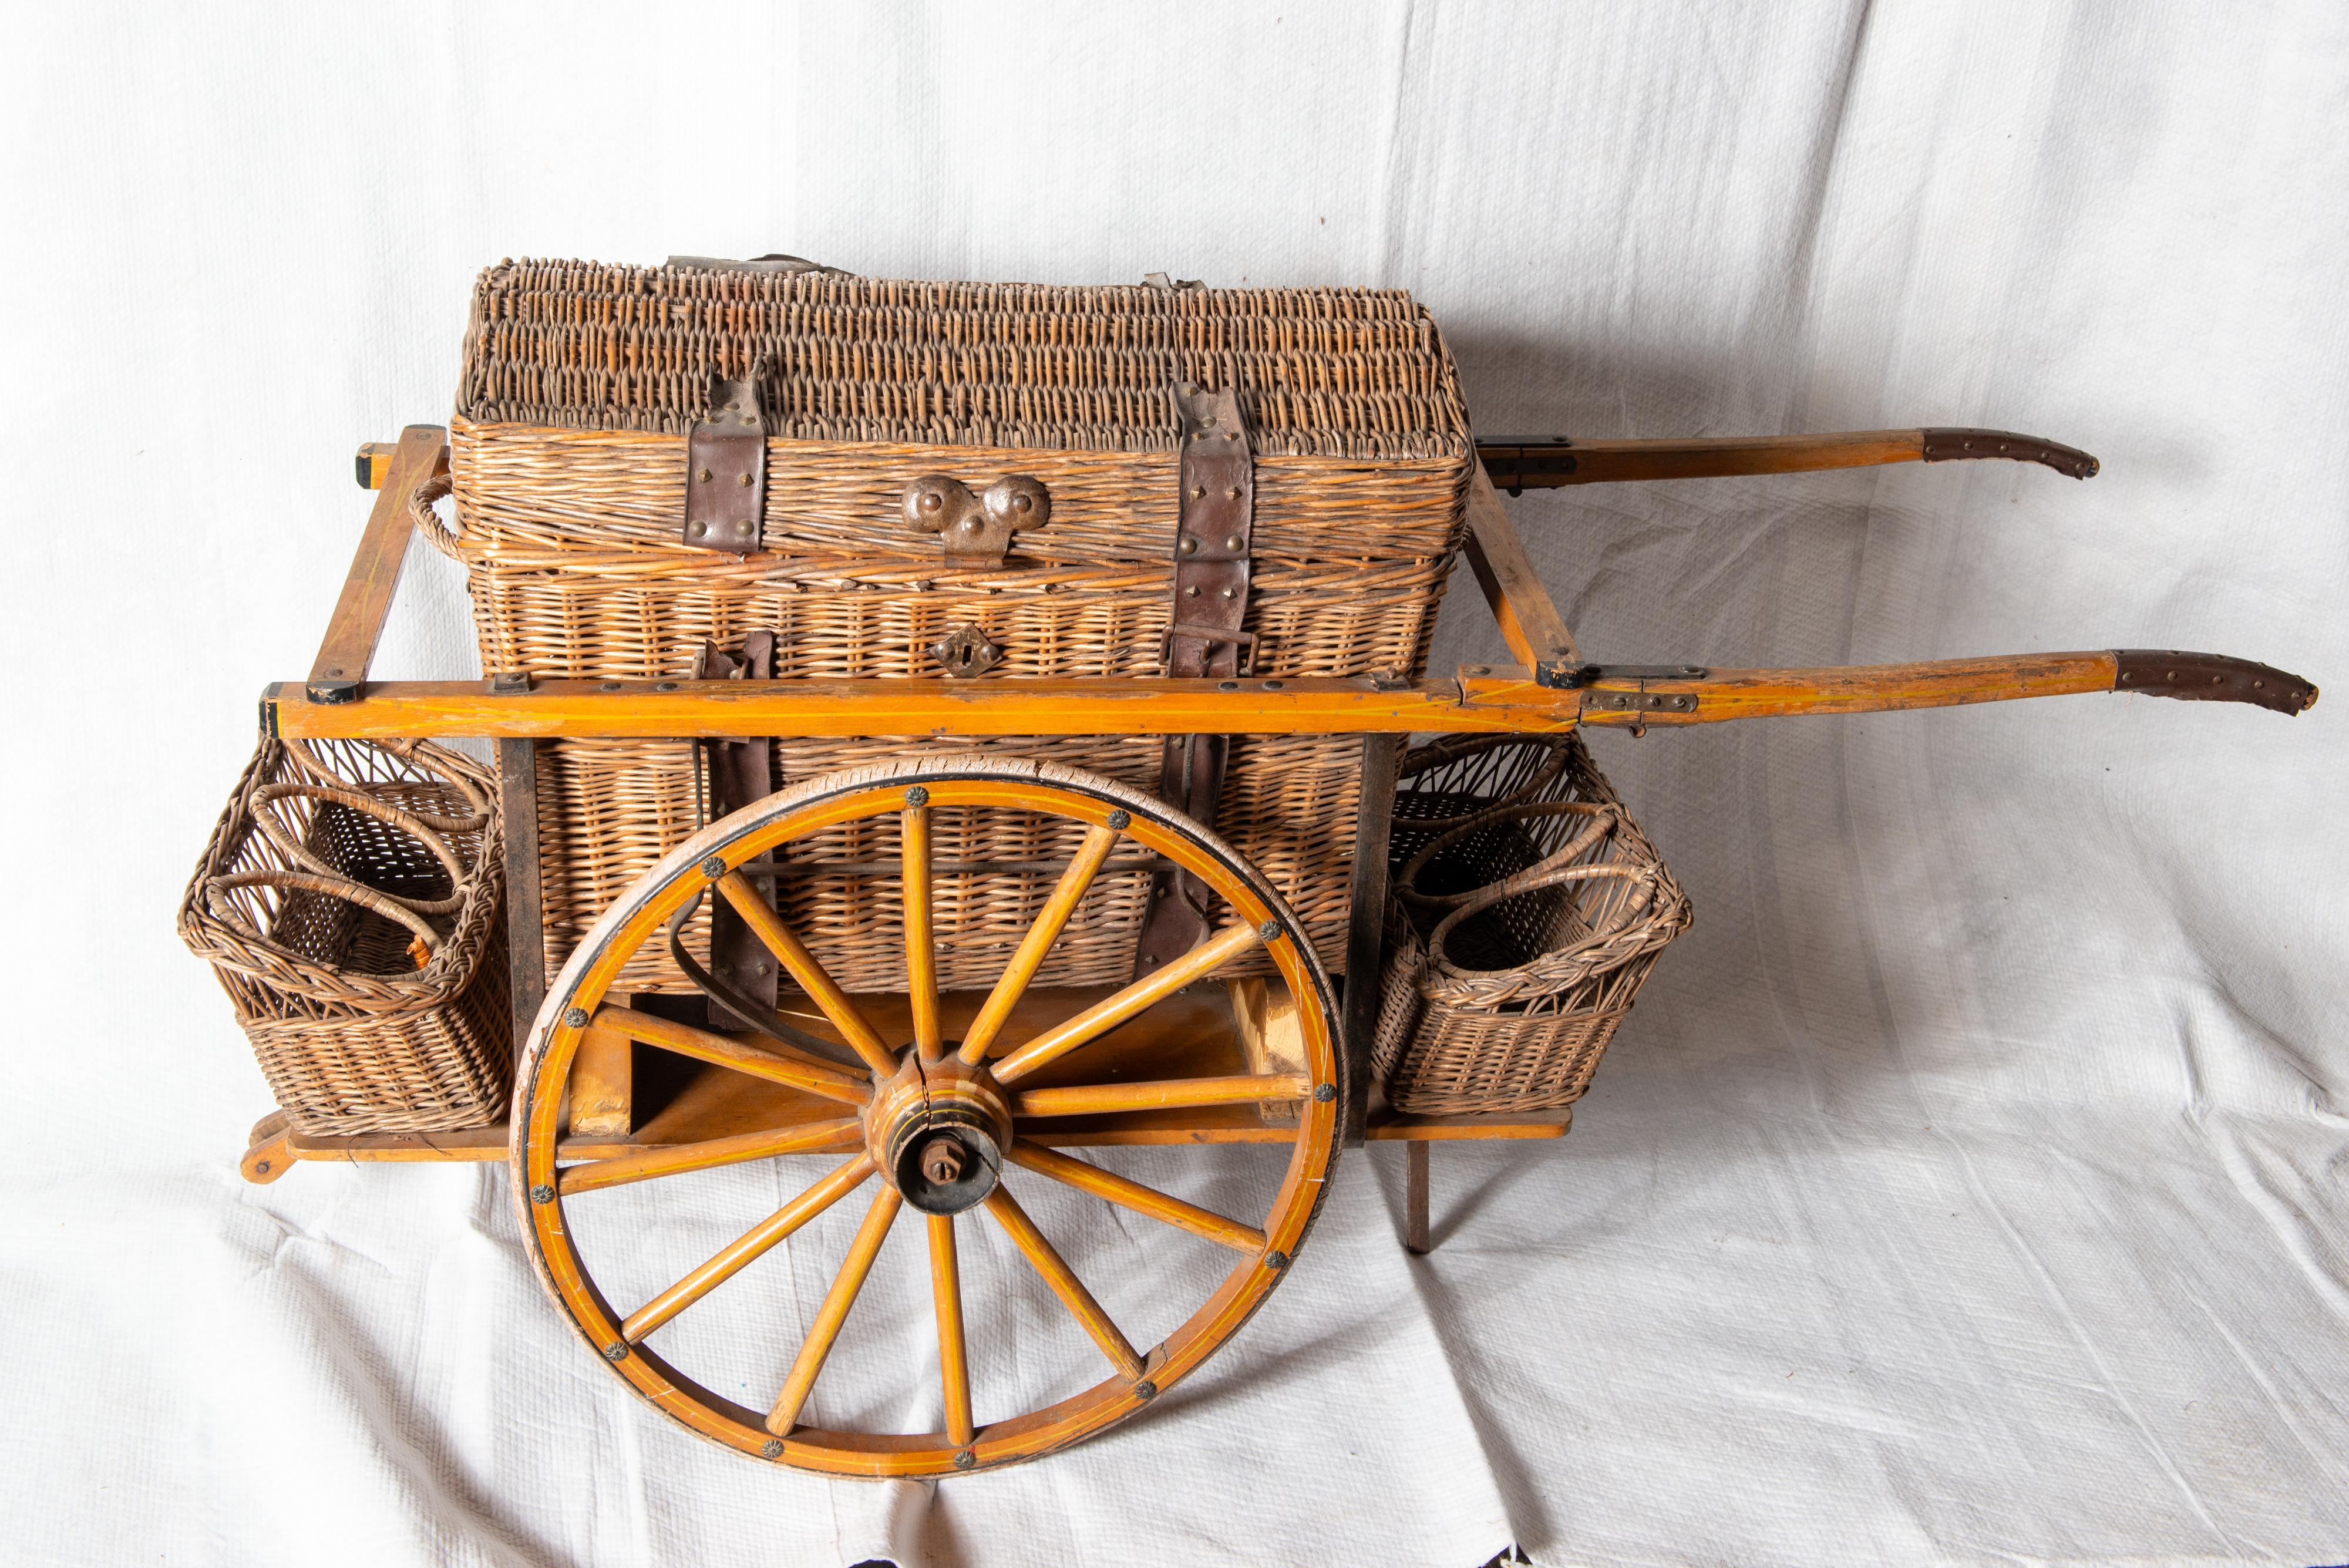 A very unusual antique wicker picnic basket set in a large wheeled cart. The cart has six circular sections for wine or water bottles. The deep covered wicker basket has a handle on each end. Inside the basket there is a wood tray with a wicker